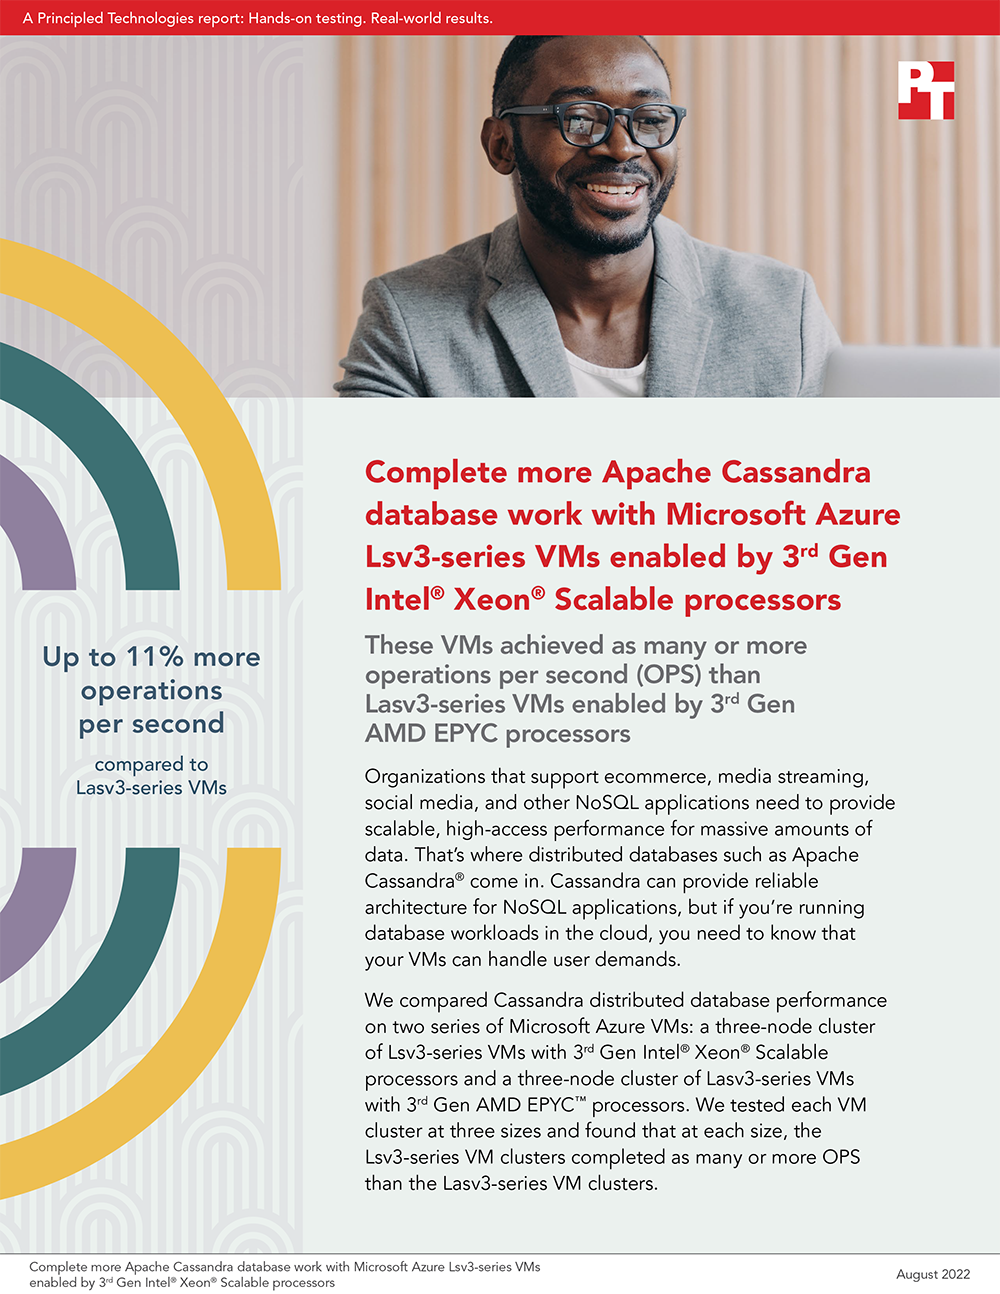 Principled Technologies Releases Report That Shows Microsoft Azure Lsv3-Series VMs Can Allow Users to Complete More Apache Cassandra Database Work